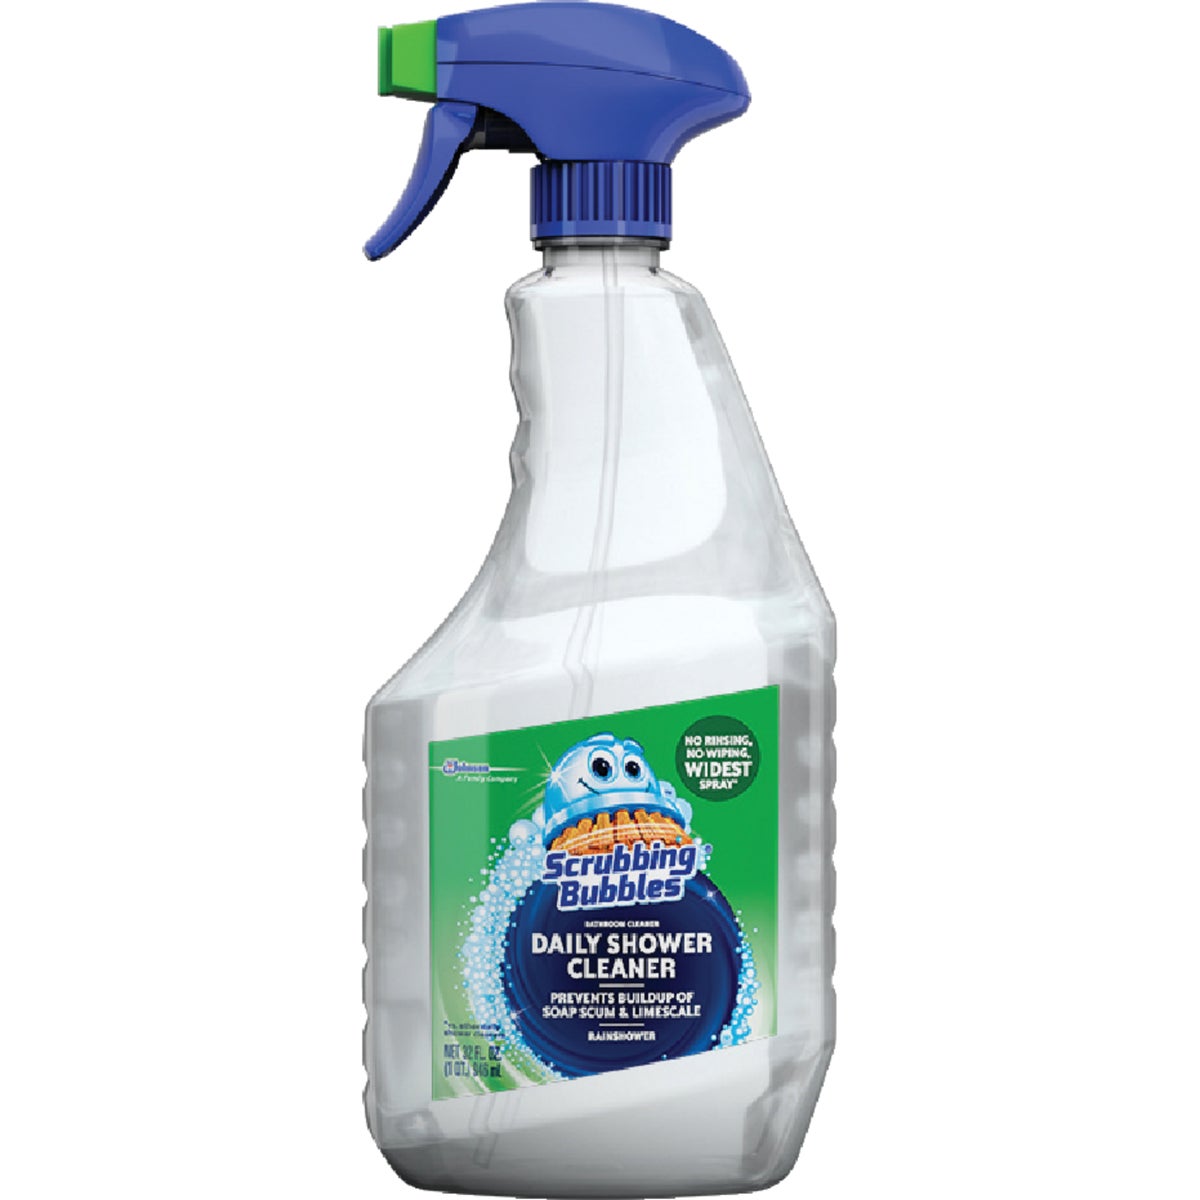 Scrubbing Bubbles 32 Oz. Daily Shower Cleaner